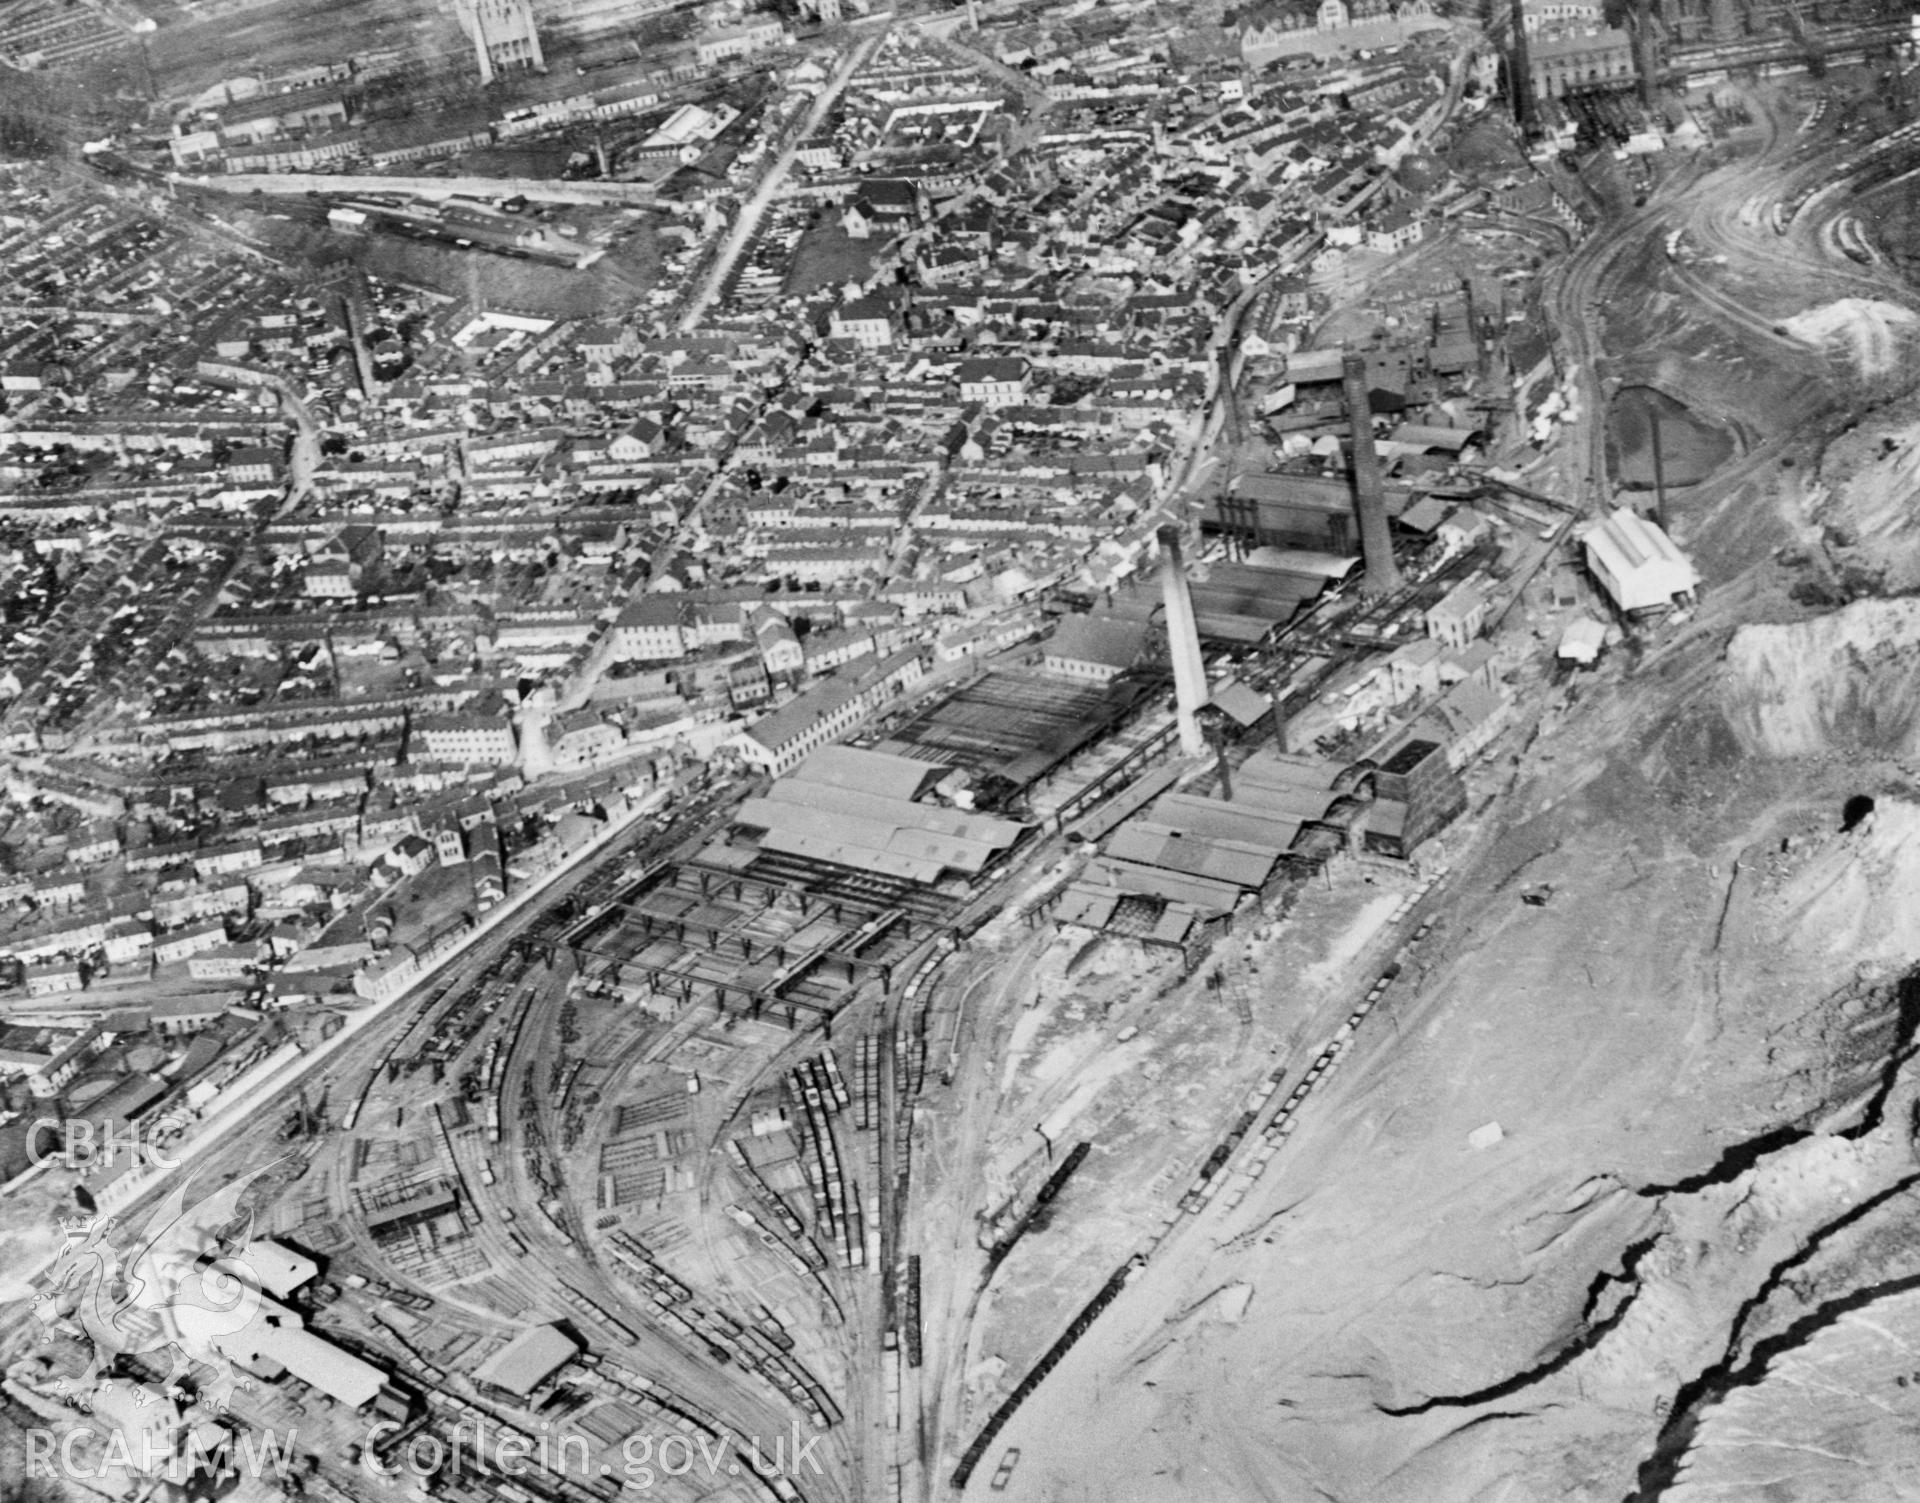 View of Dowlais Ironworks, Merthyr showing the 'Goat Mill'. Oblique aerial photograph, 5?x4? BW glass plate.